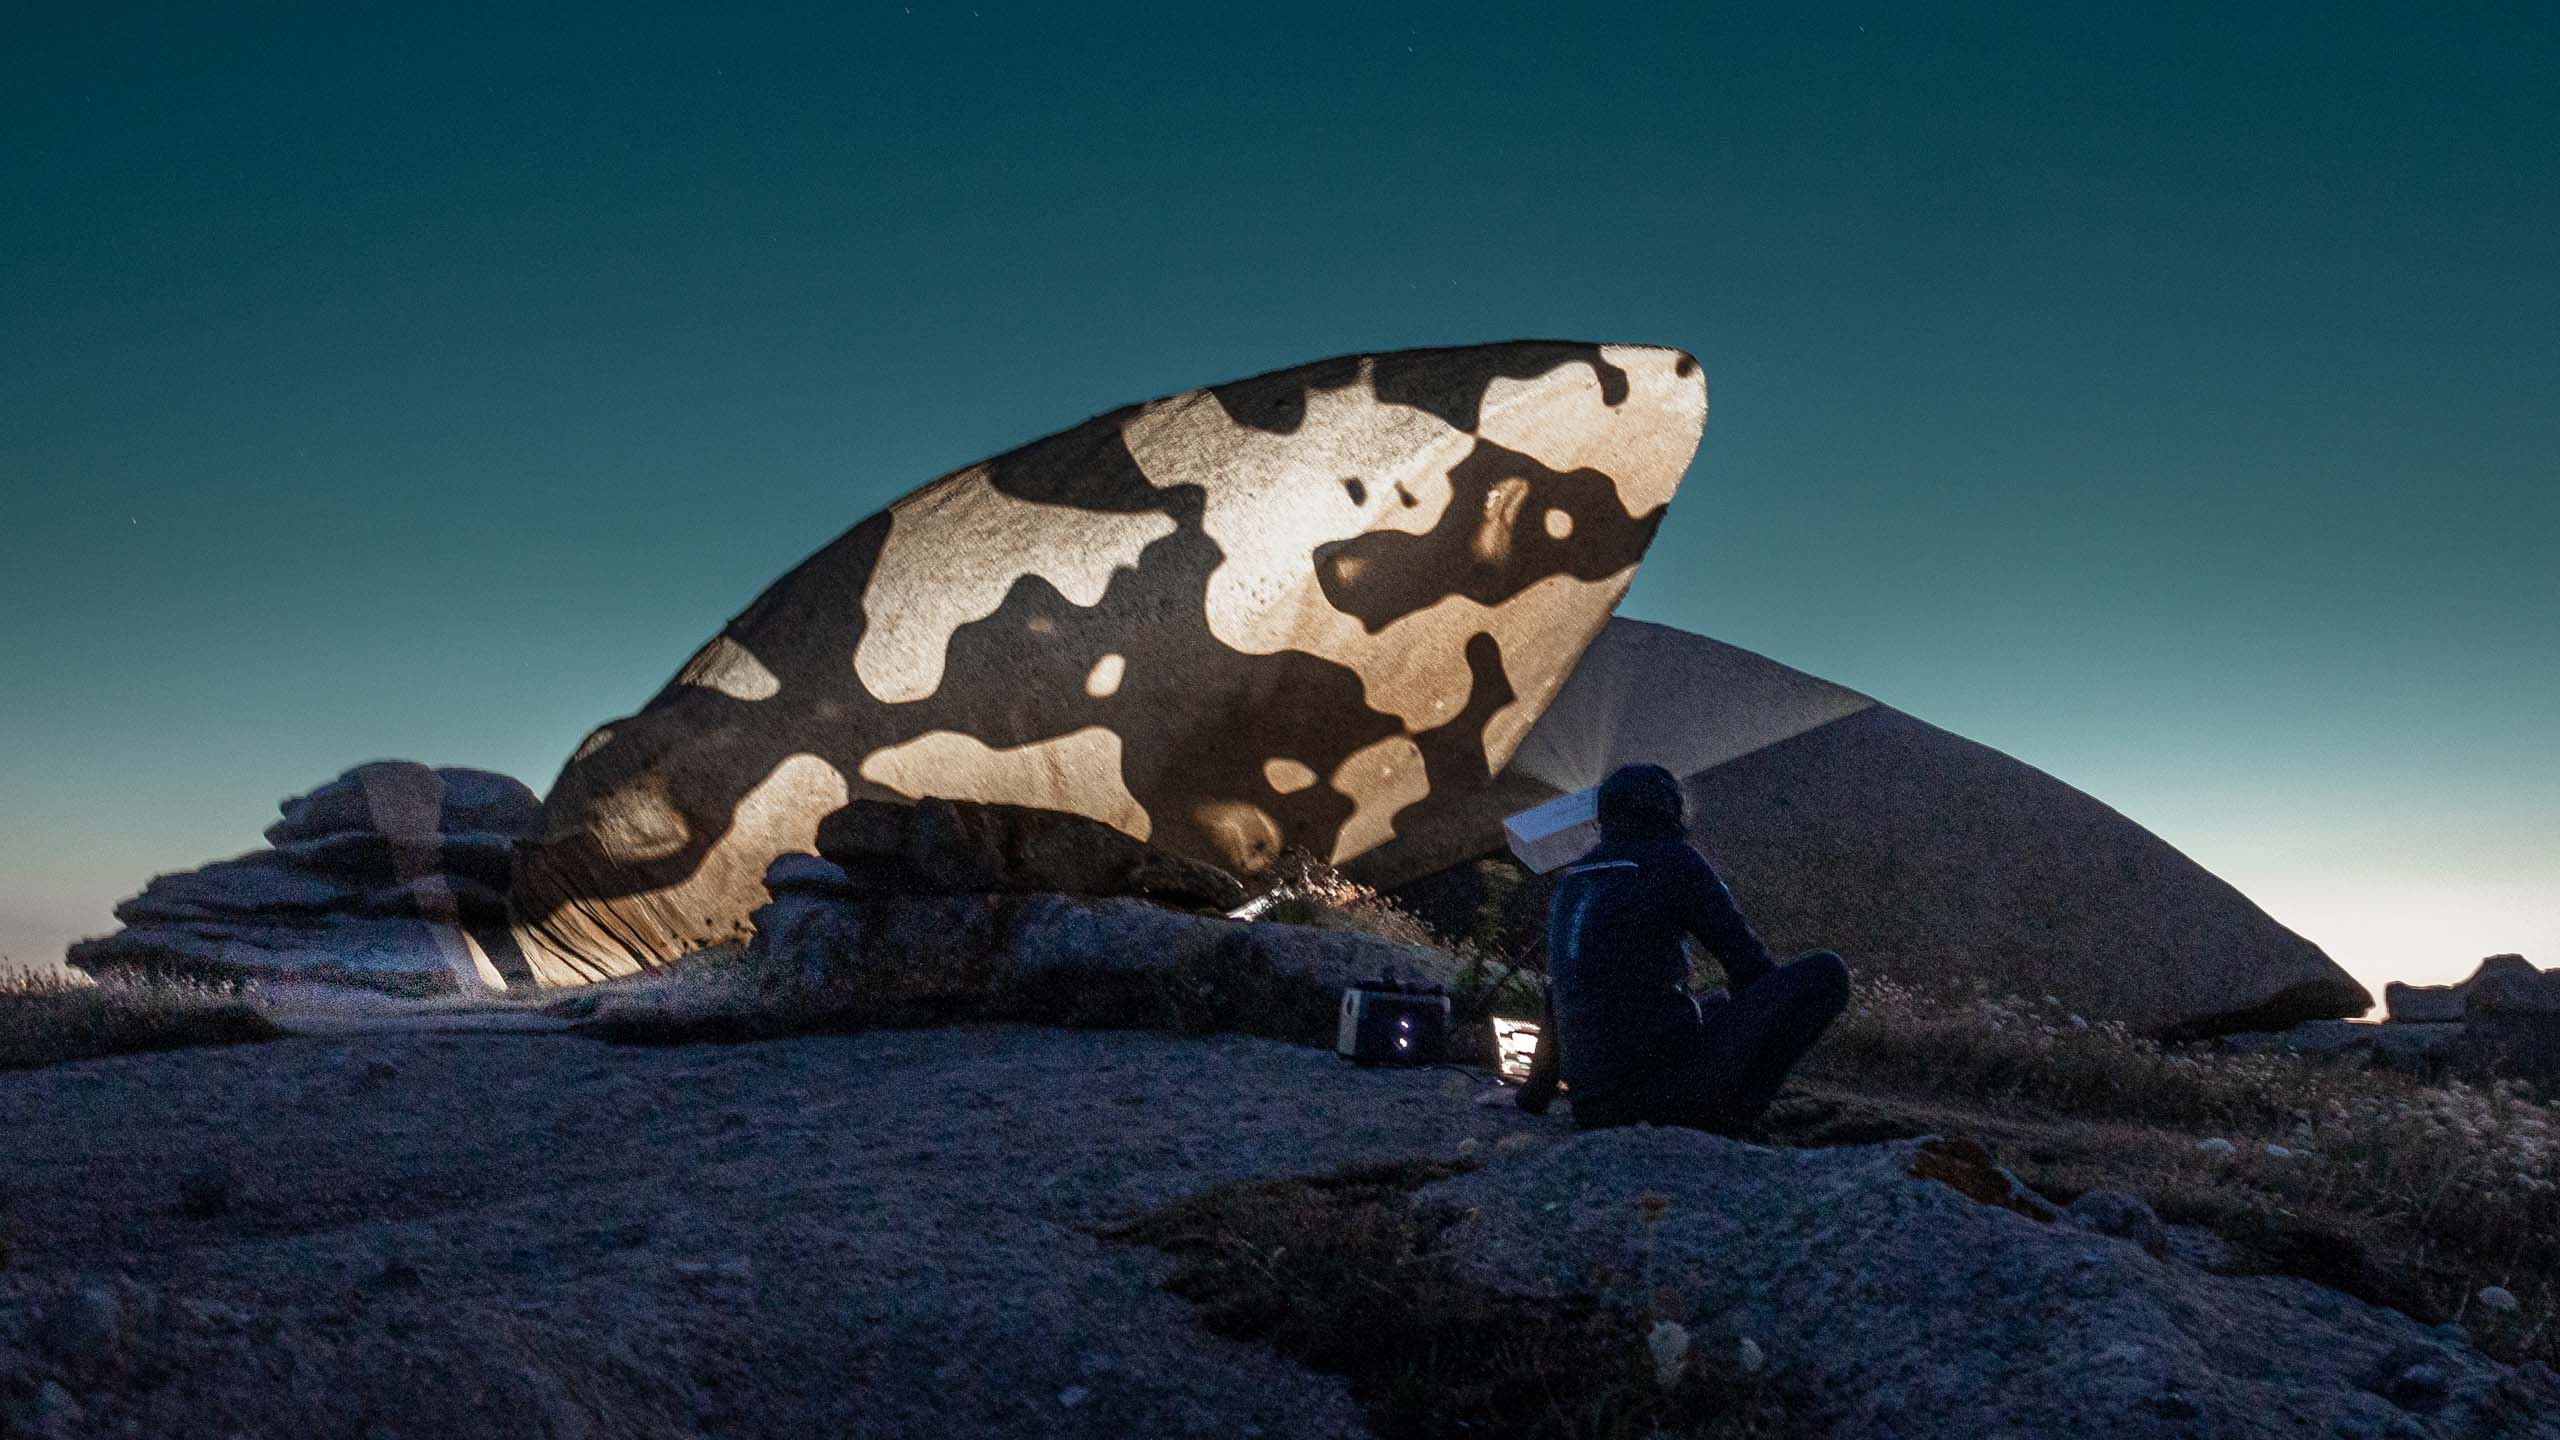 Philipp-Frank-at work with light projections on a beautiful boulder